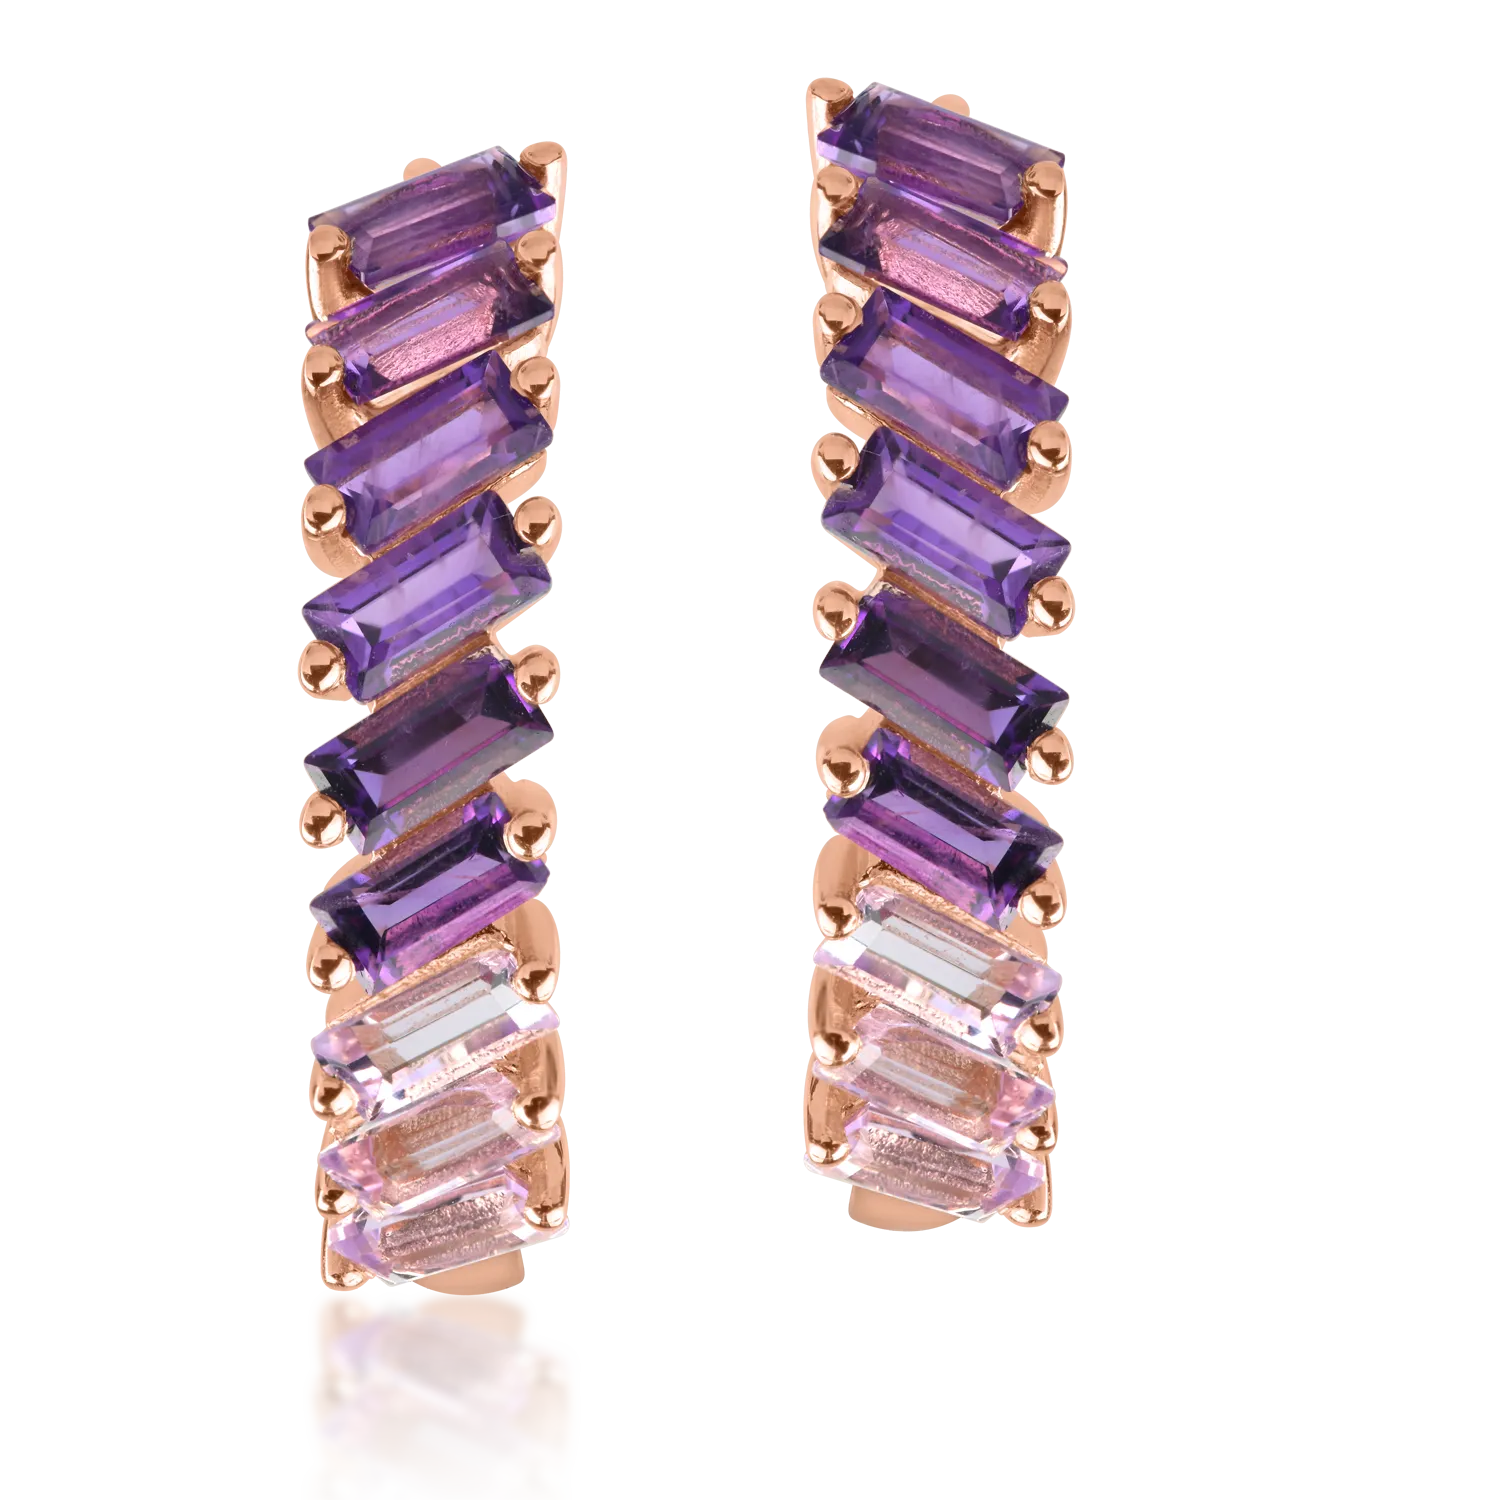 Rose gold earrings with 1.7ct amethysts